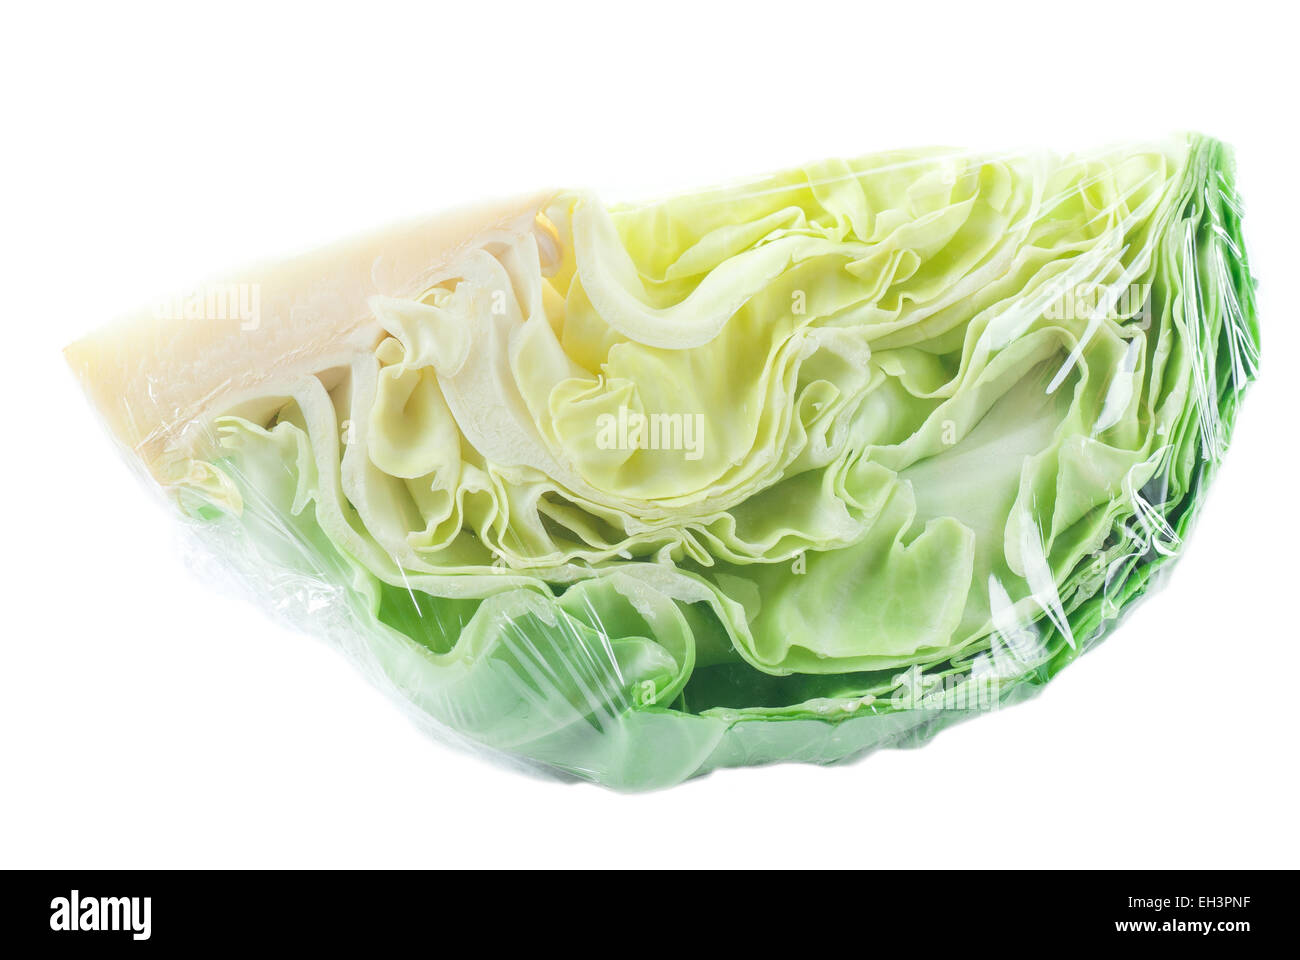 Plastic wrapped cabbage on white background. Stock Photo